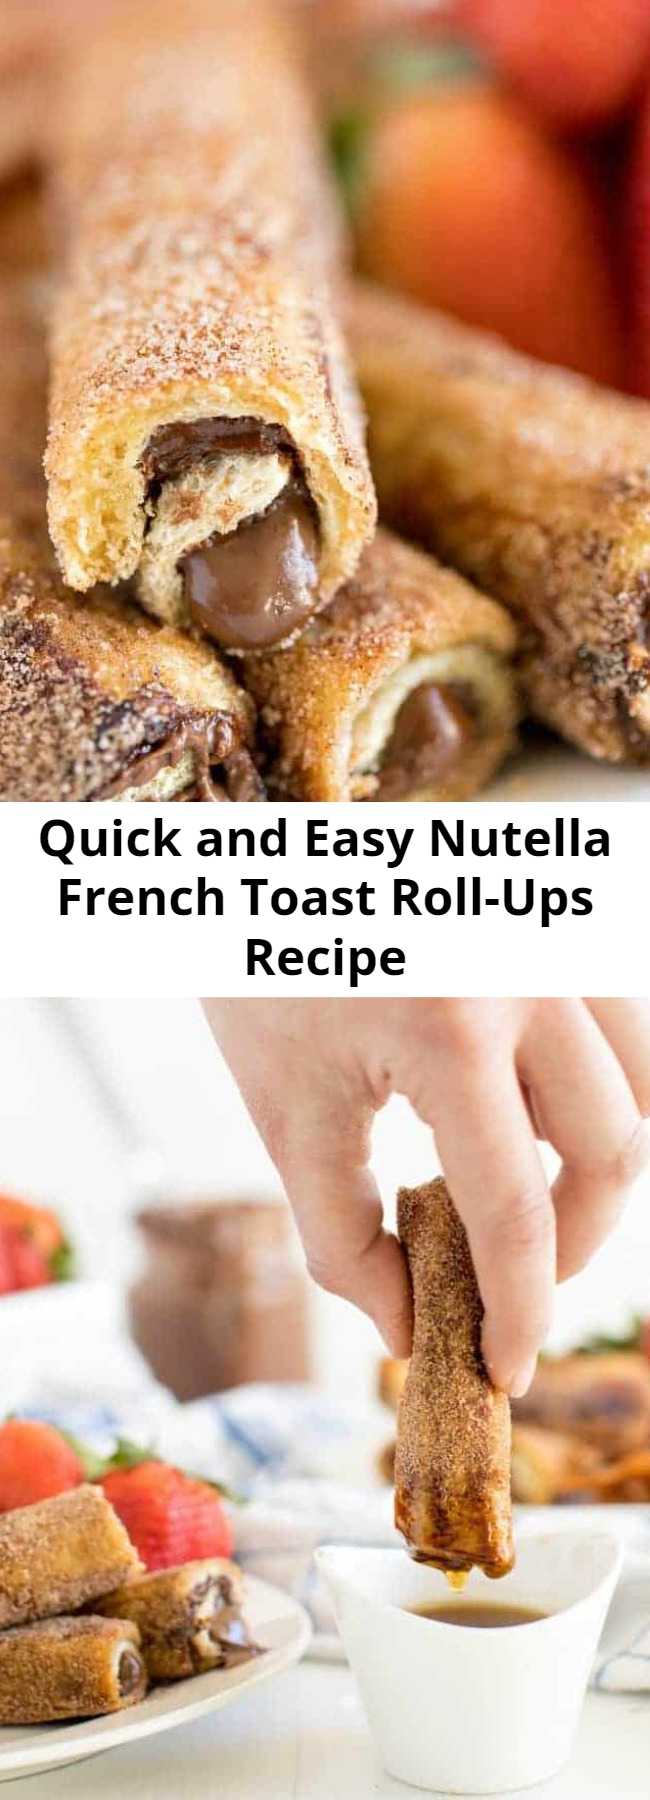 Quick and Easy Nutella French Toast Roll-Ups Recipe - These Nutella French Toast Roll-Ups are quick and easy to make and a fun, finger-friendly treat for breakfast or brunch. #frenchtoast #nutella #cinnamon #cinnamonsugar #fingerfood #easyfrenchtoast #brunch #brunchrecipe #breakfast #rollup